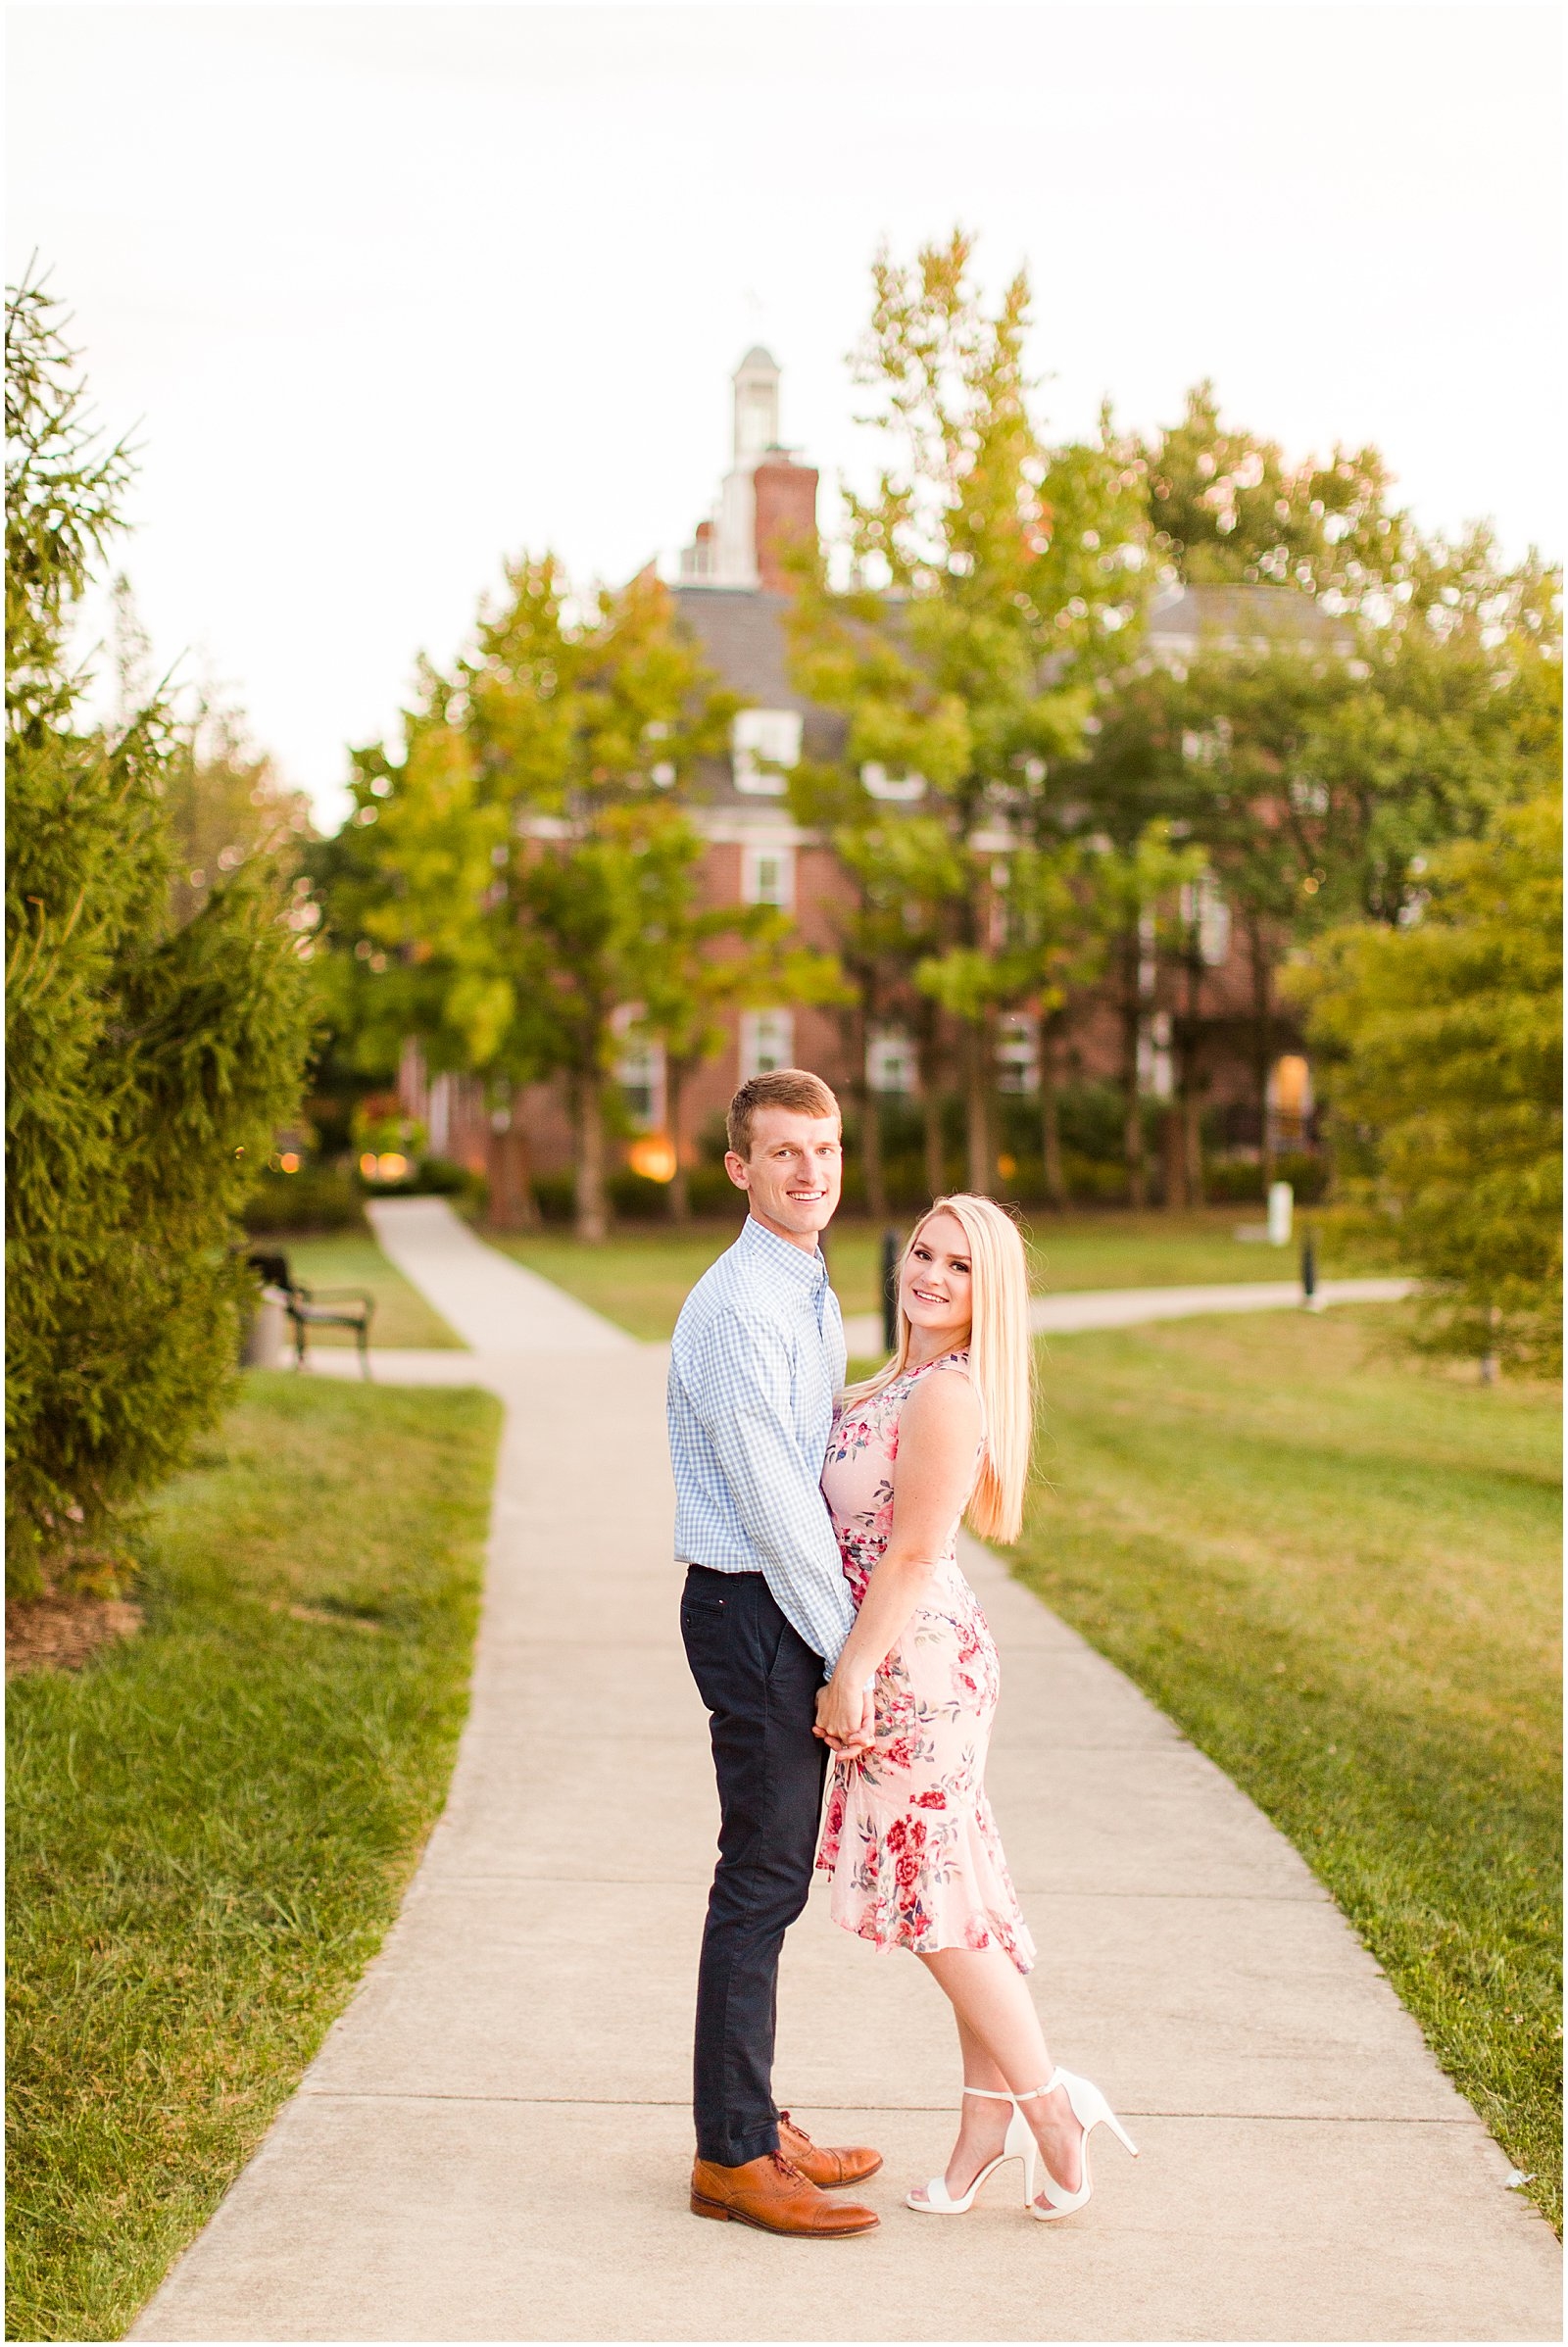 A Cute and Cuddly Engagement Session in Carmel, IN | Abbi and Josh0057.jpg